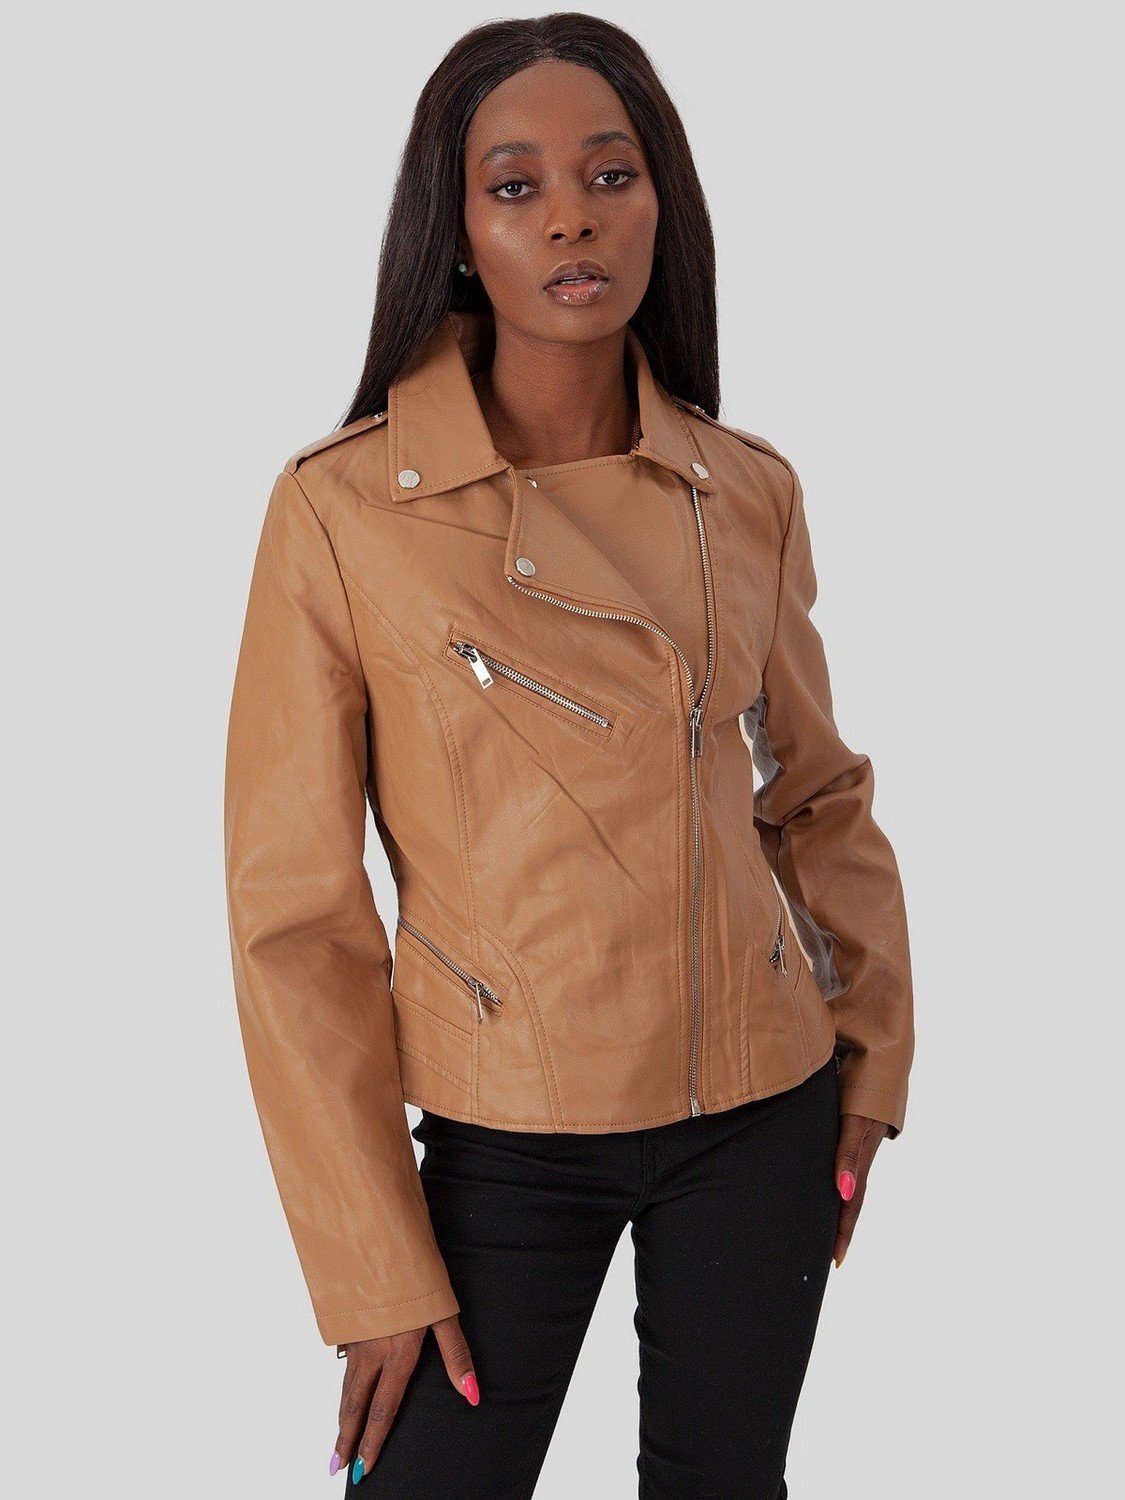 PERSO Woman's Jacket BLE220011F